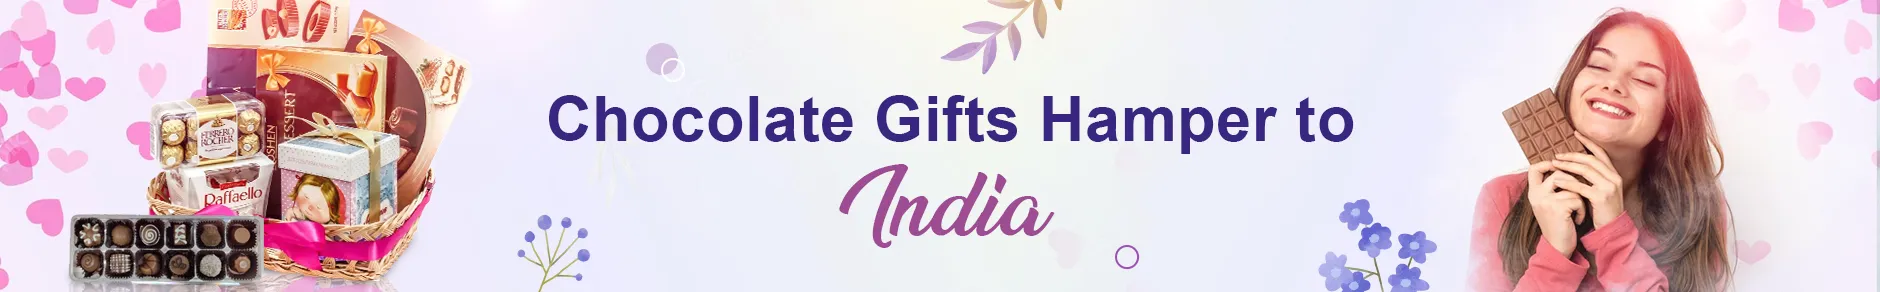 Chocolates - Send Chocolates Gifts Online to India